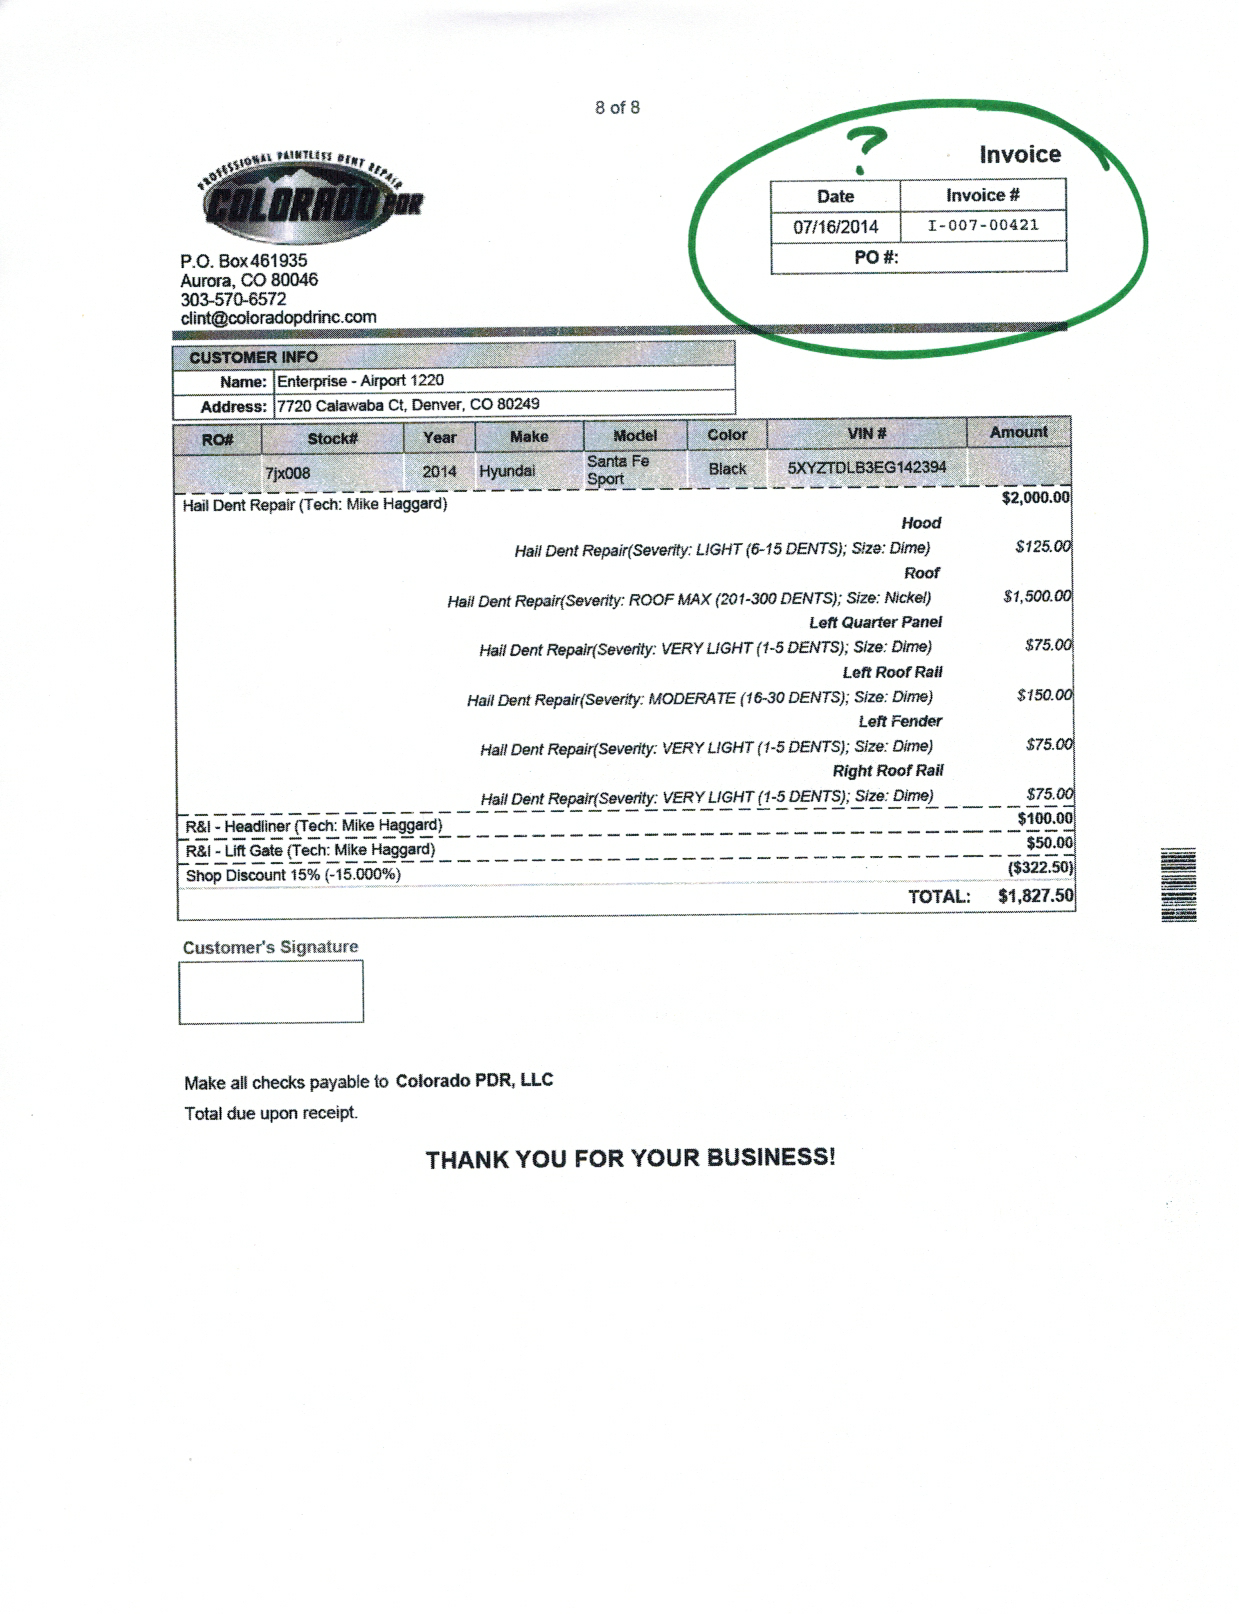 Pics and Invoice dated 7/16/2014???